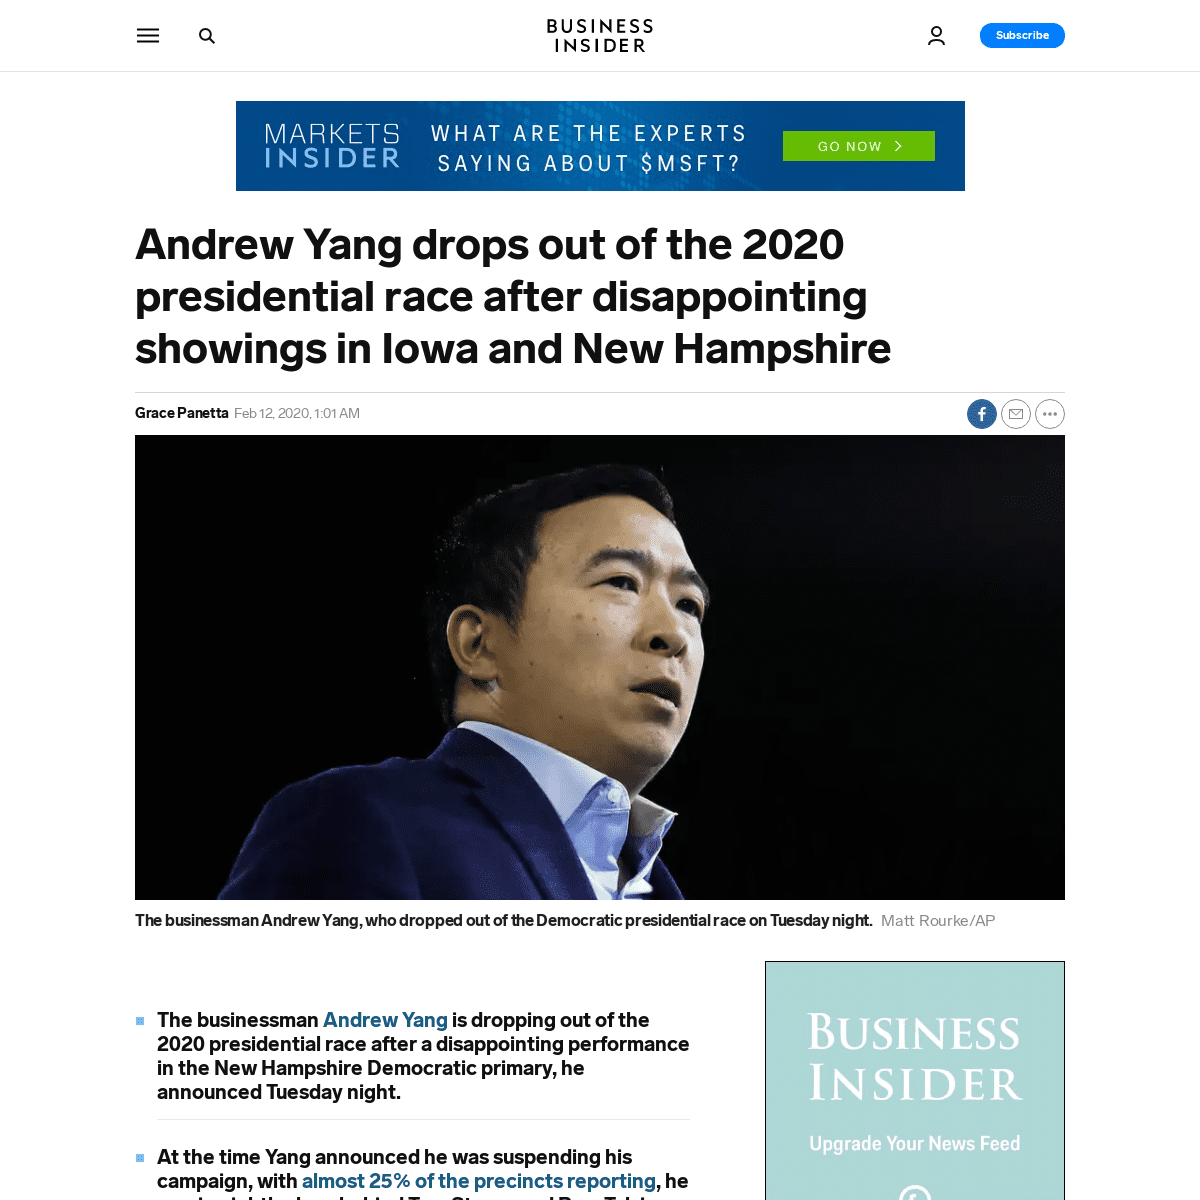 A complete backup of www.businessinsider.com/andrew-yang-drops-out-of-presidential-race-after-new-hampshire-2020-2